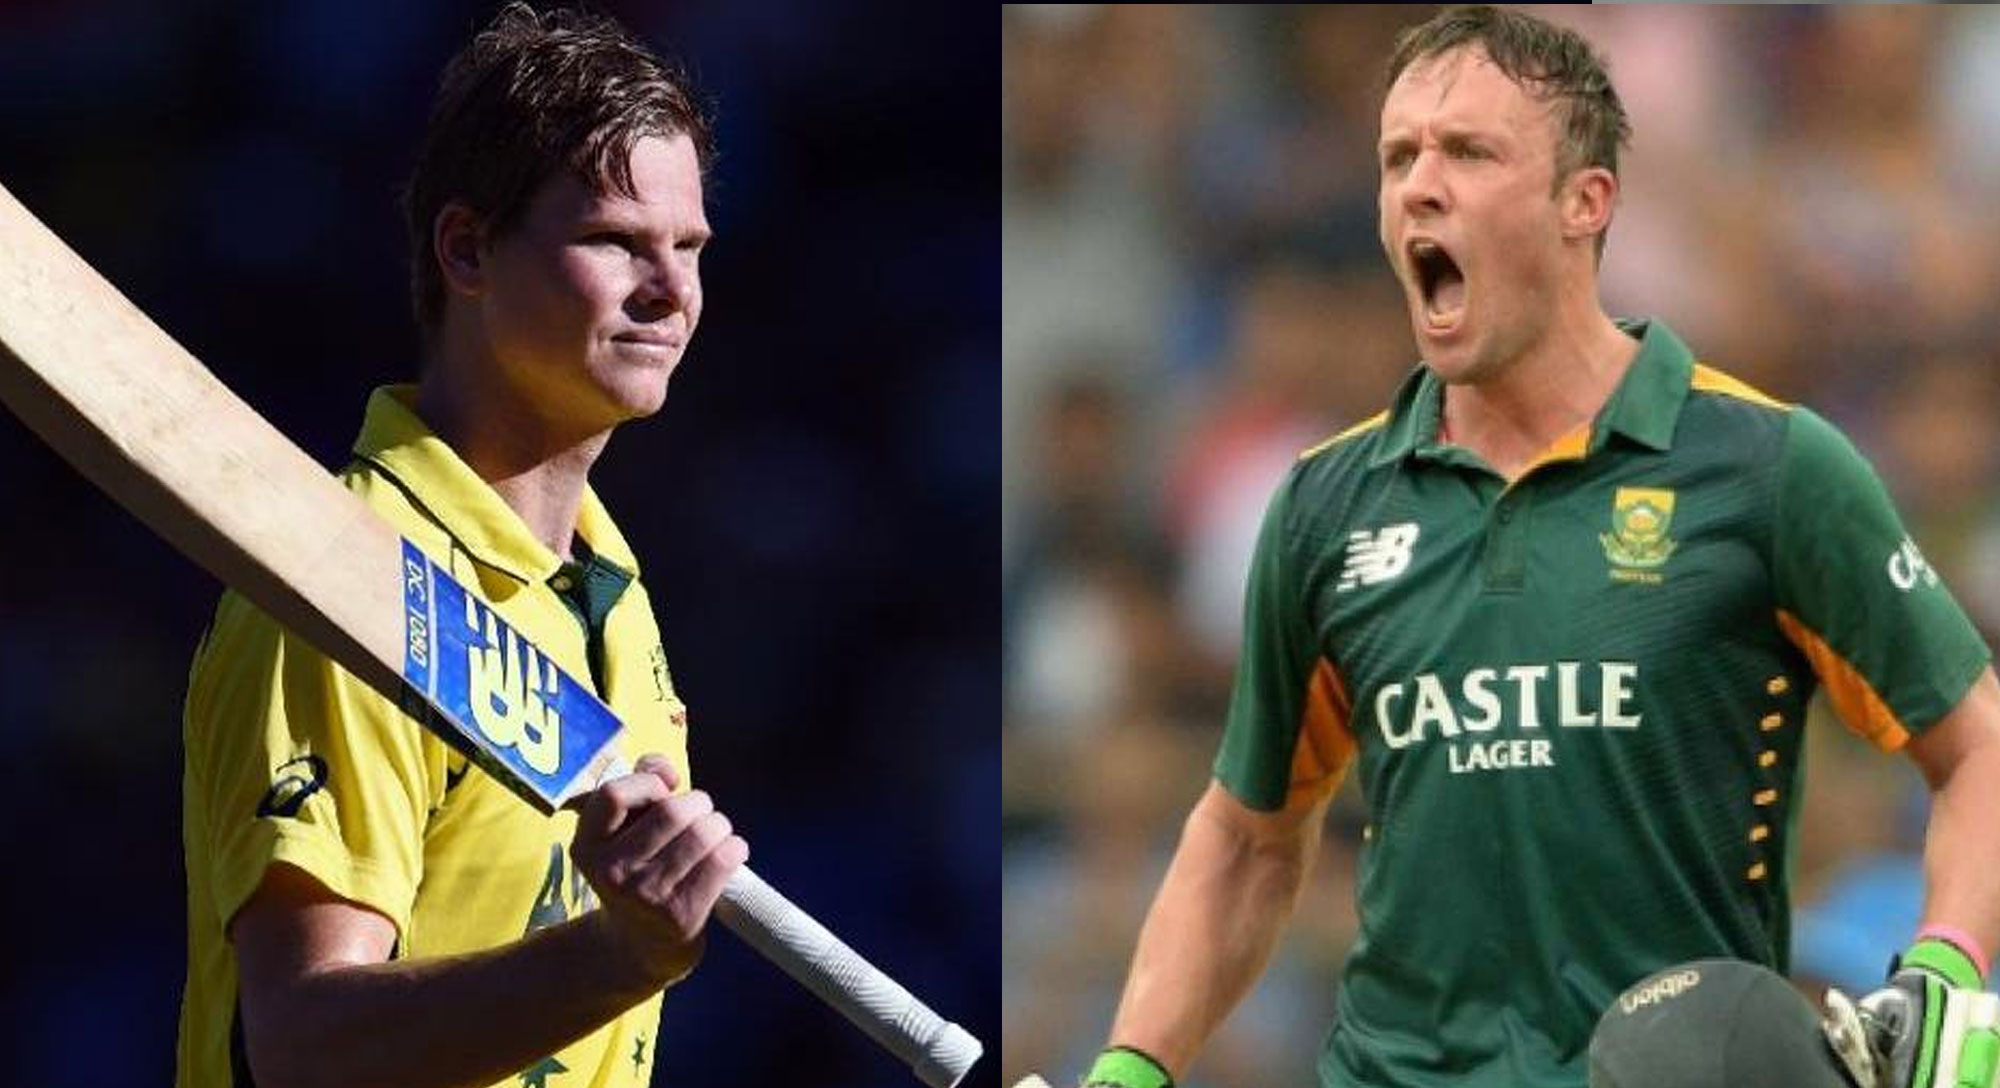 smith de villiers in platinum category for psl4 draft